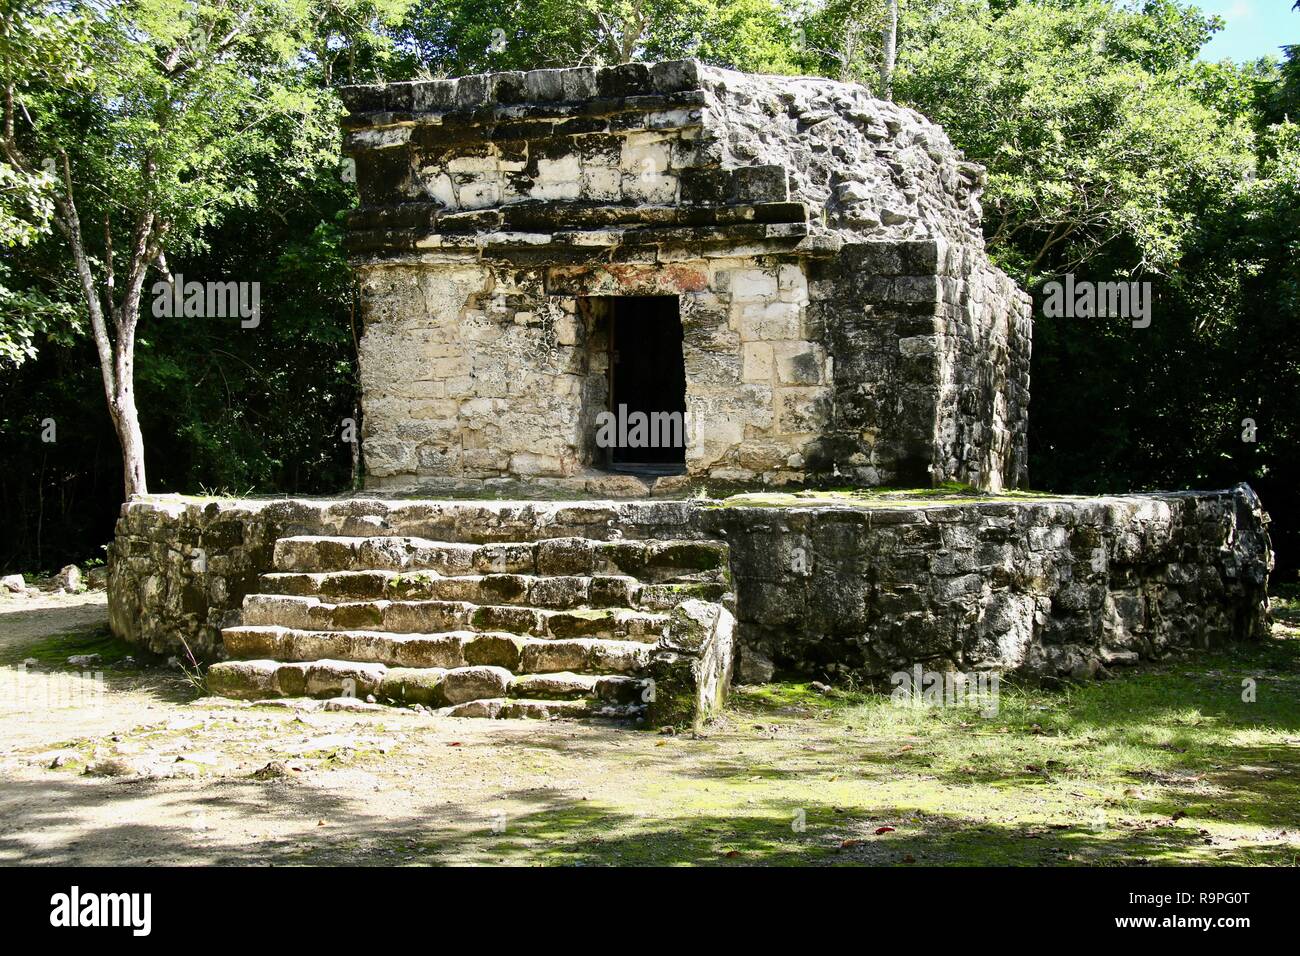 Evidence of the Mayan empire in ruins on Cozumel Island Stock Photo